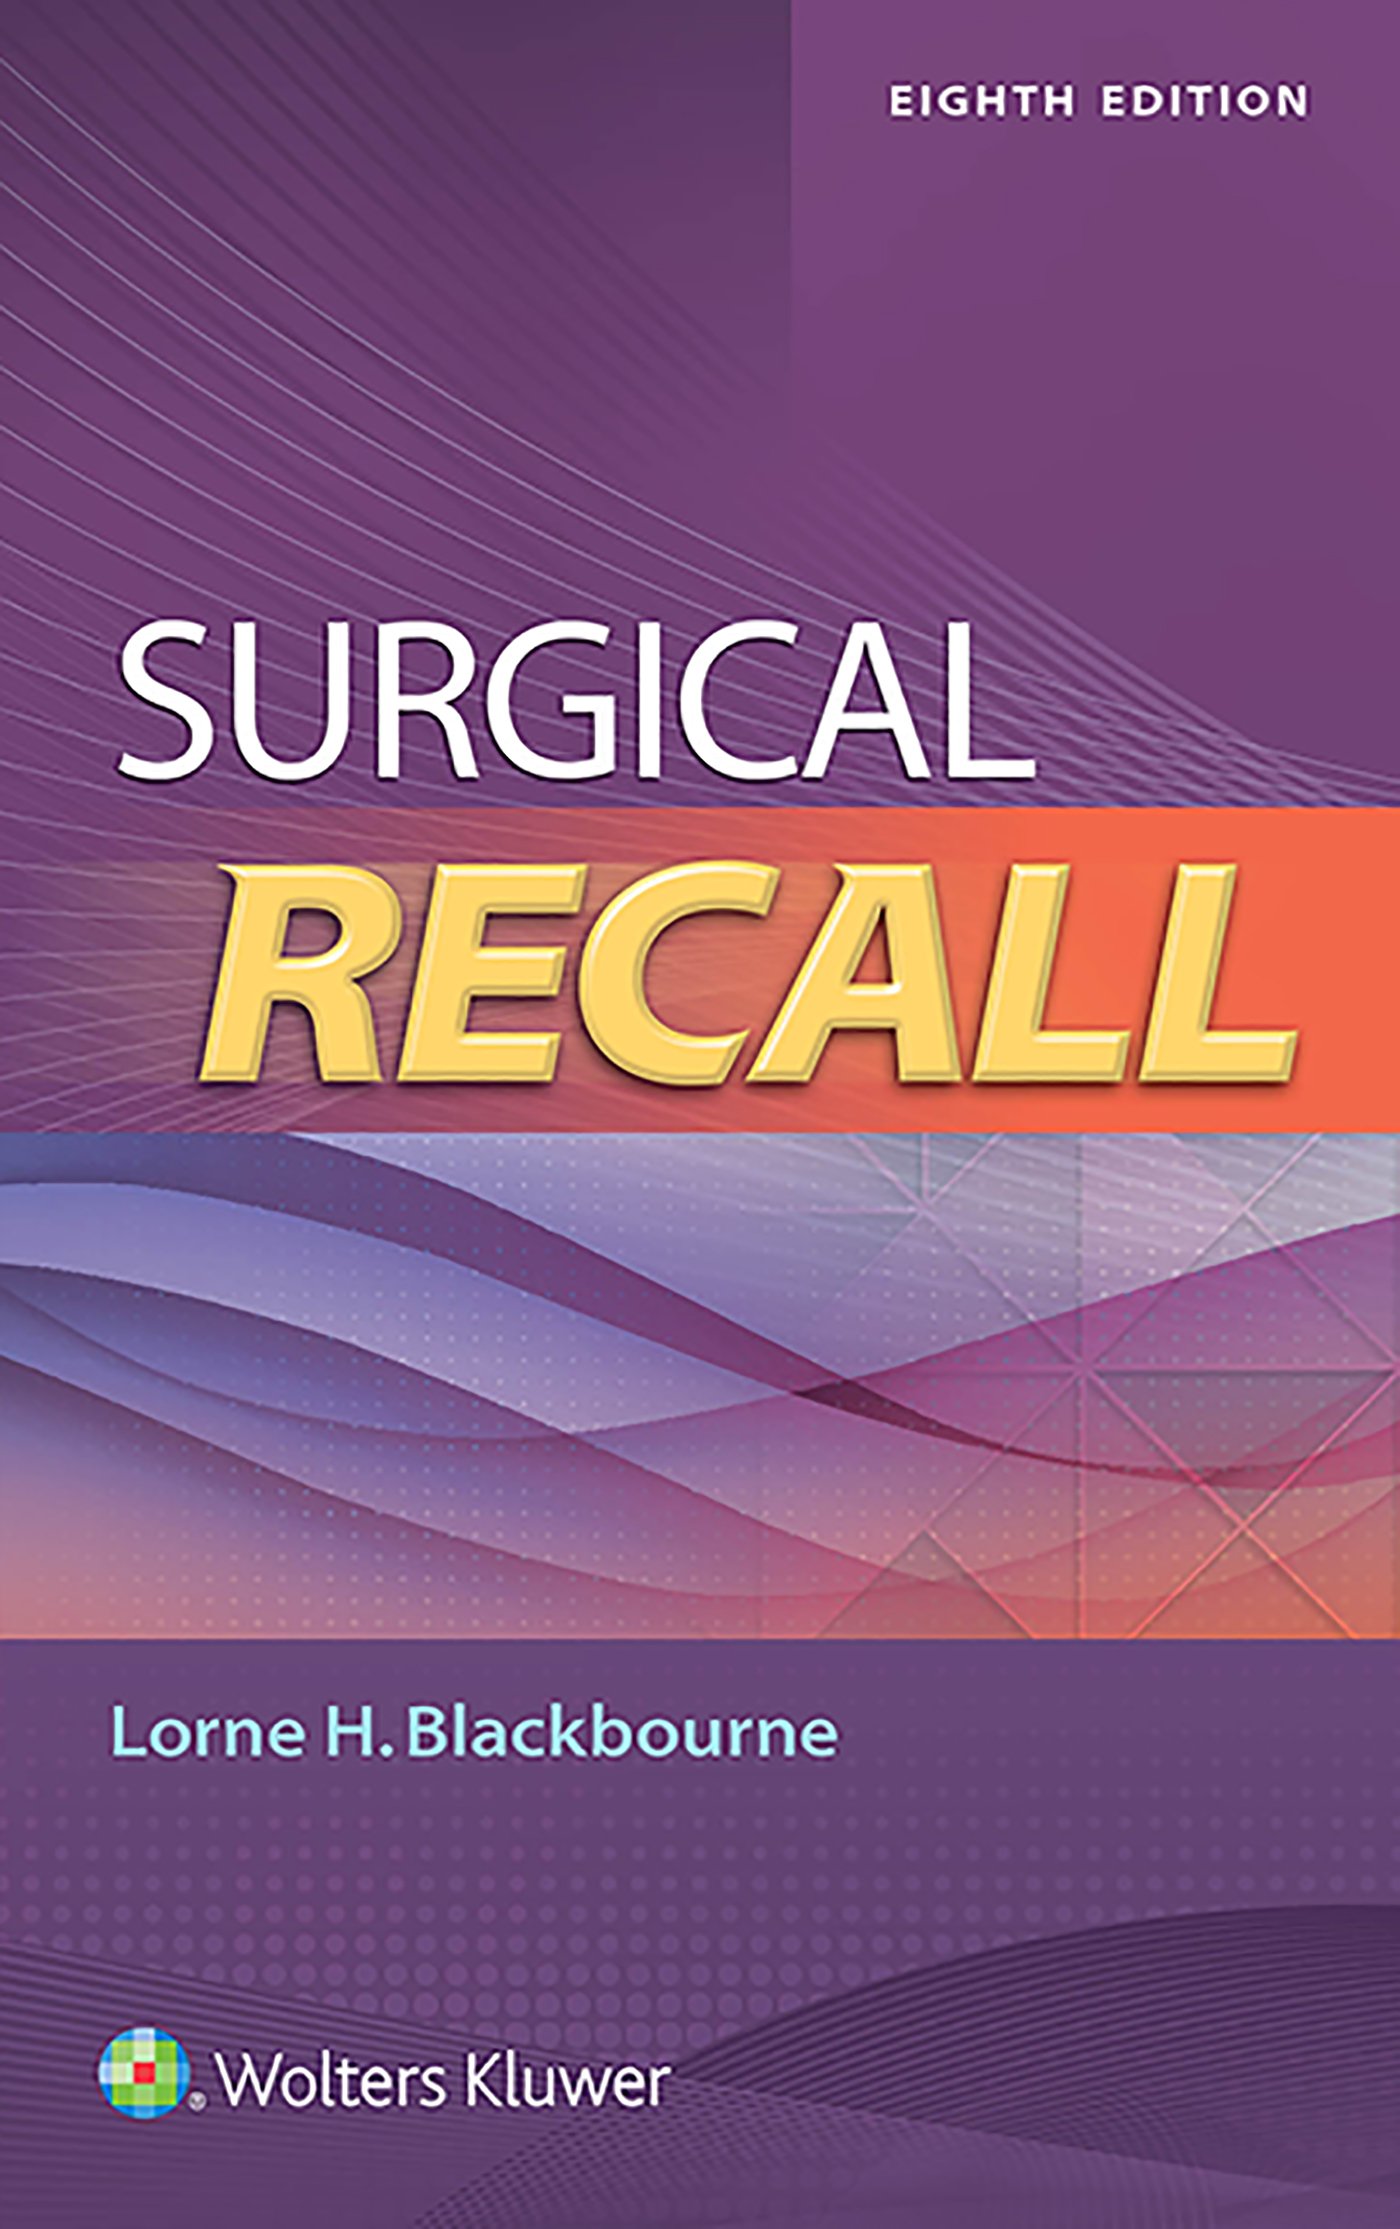 [PDF] Download Surgical Recall Book in pdf